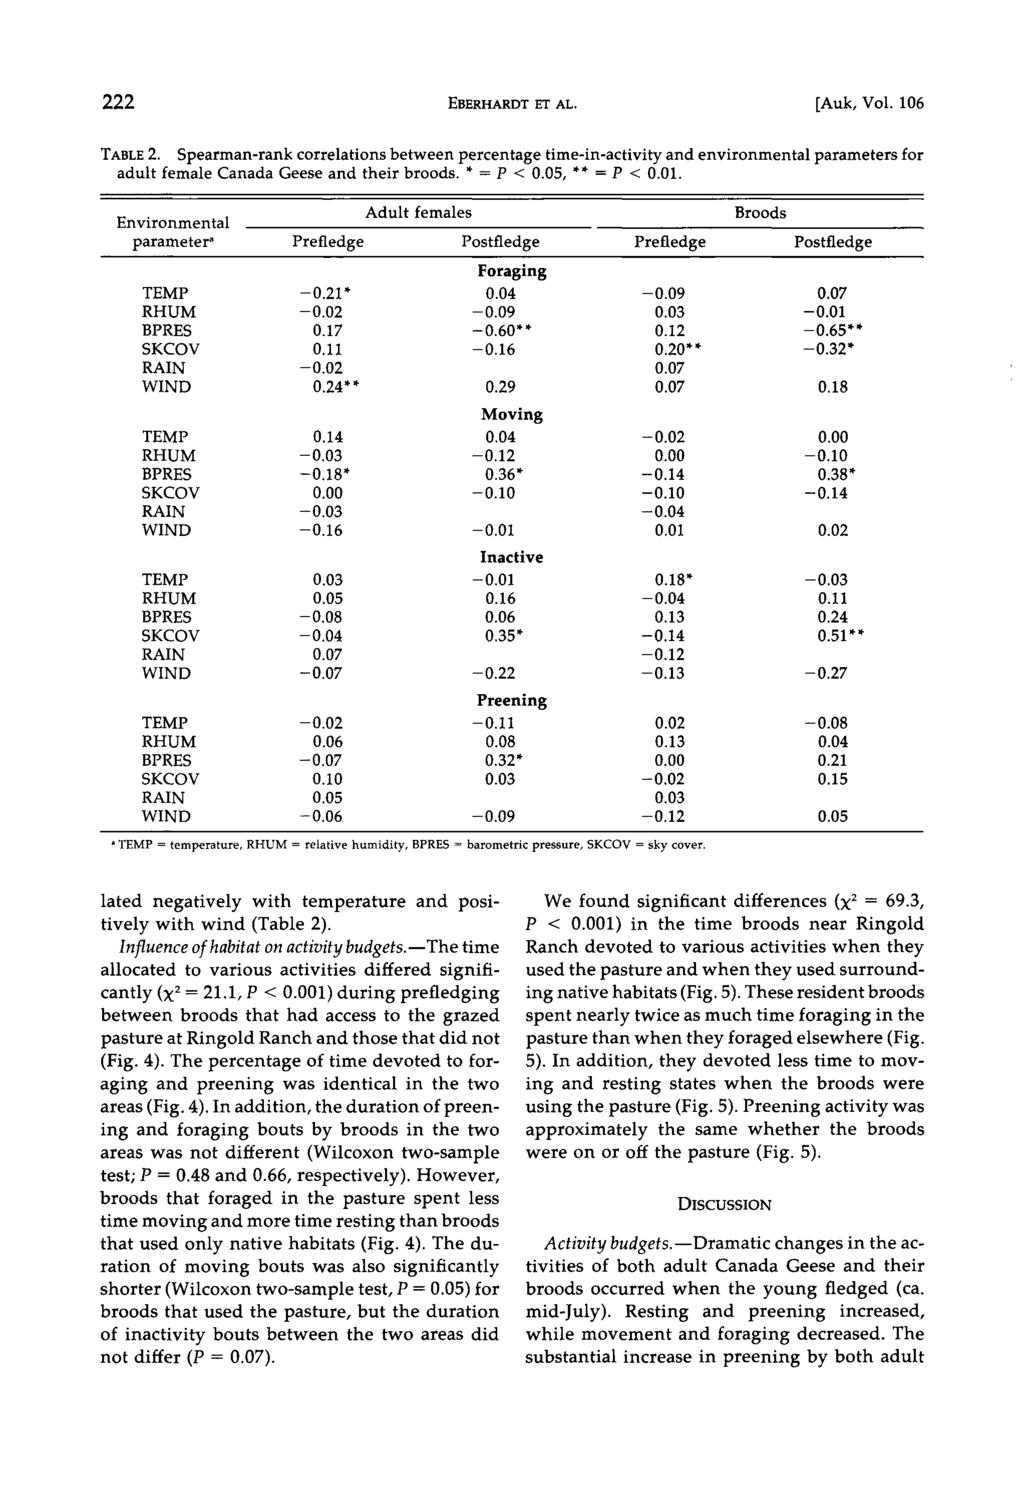 222 EBERHARDT ET AL. [Auk, Vol. 106 TABLE 2. Spearman-rank correlations between percentage time-in-activity and environmental parameters for adult female Canada Geese and their broods. * = P < 0.